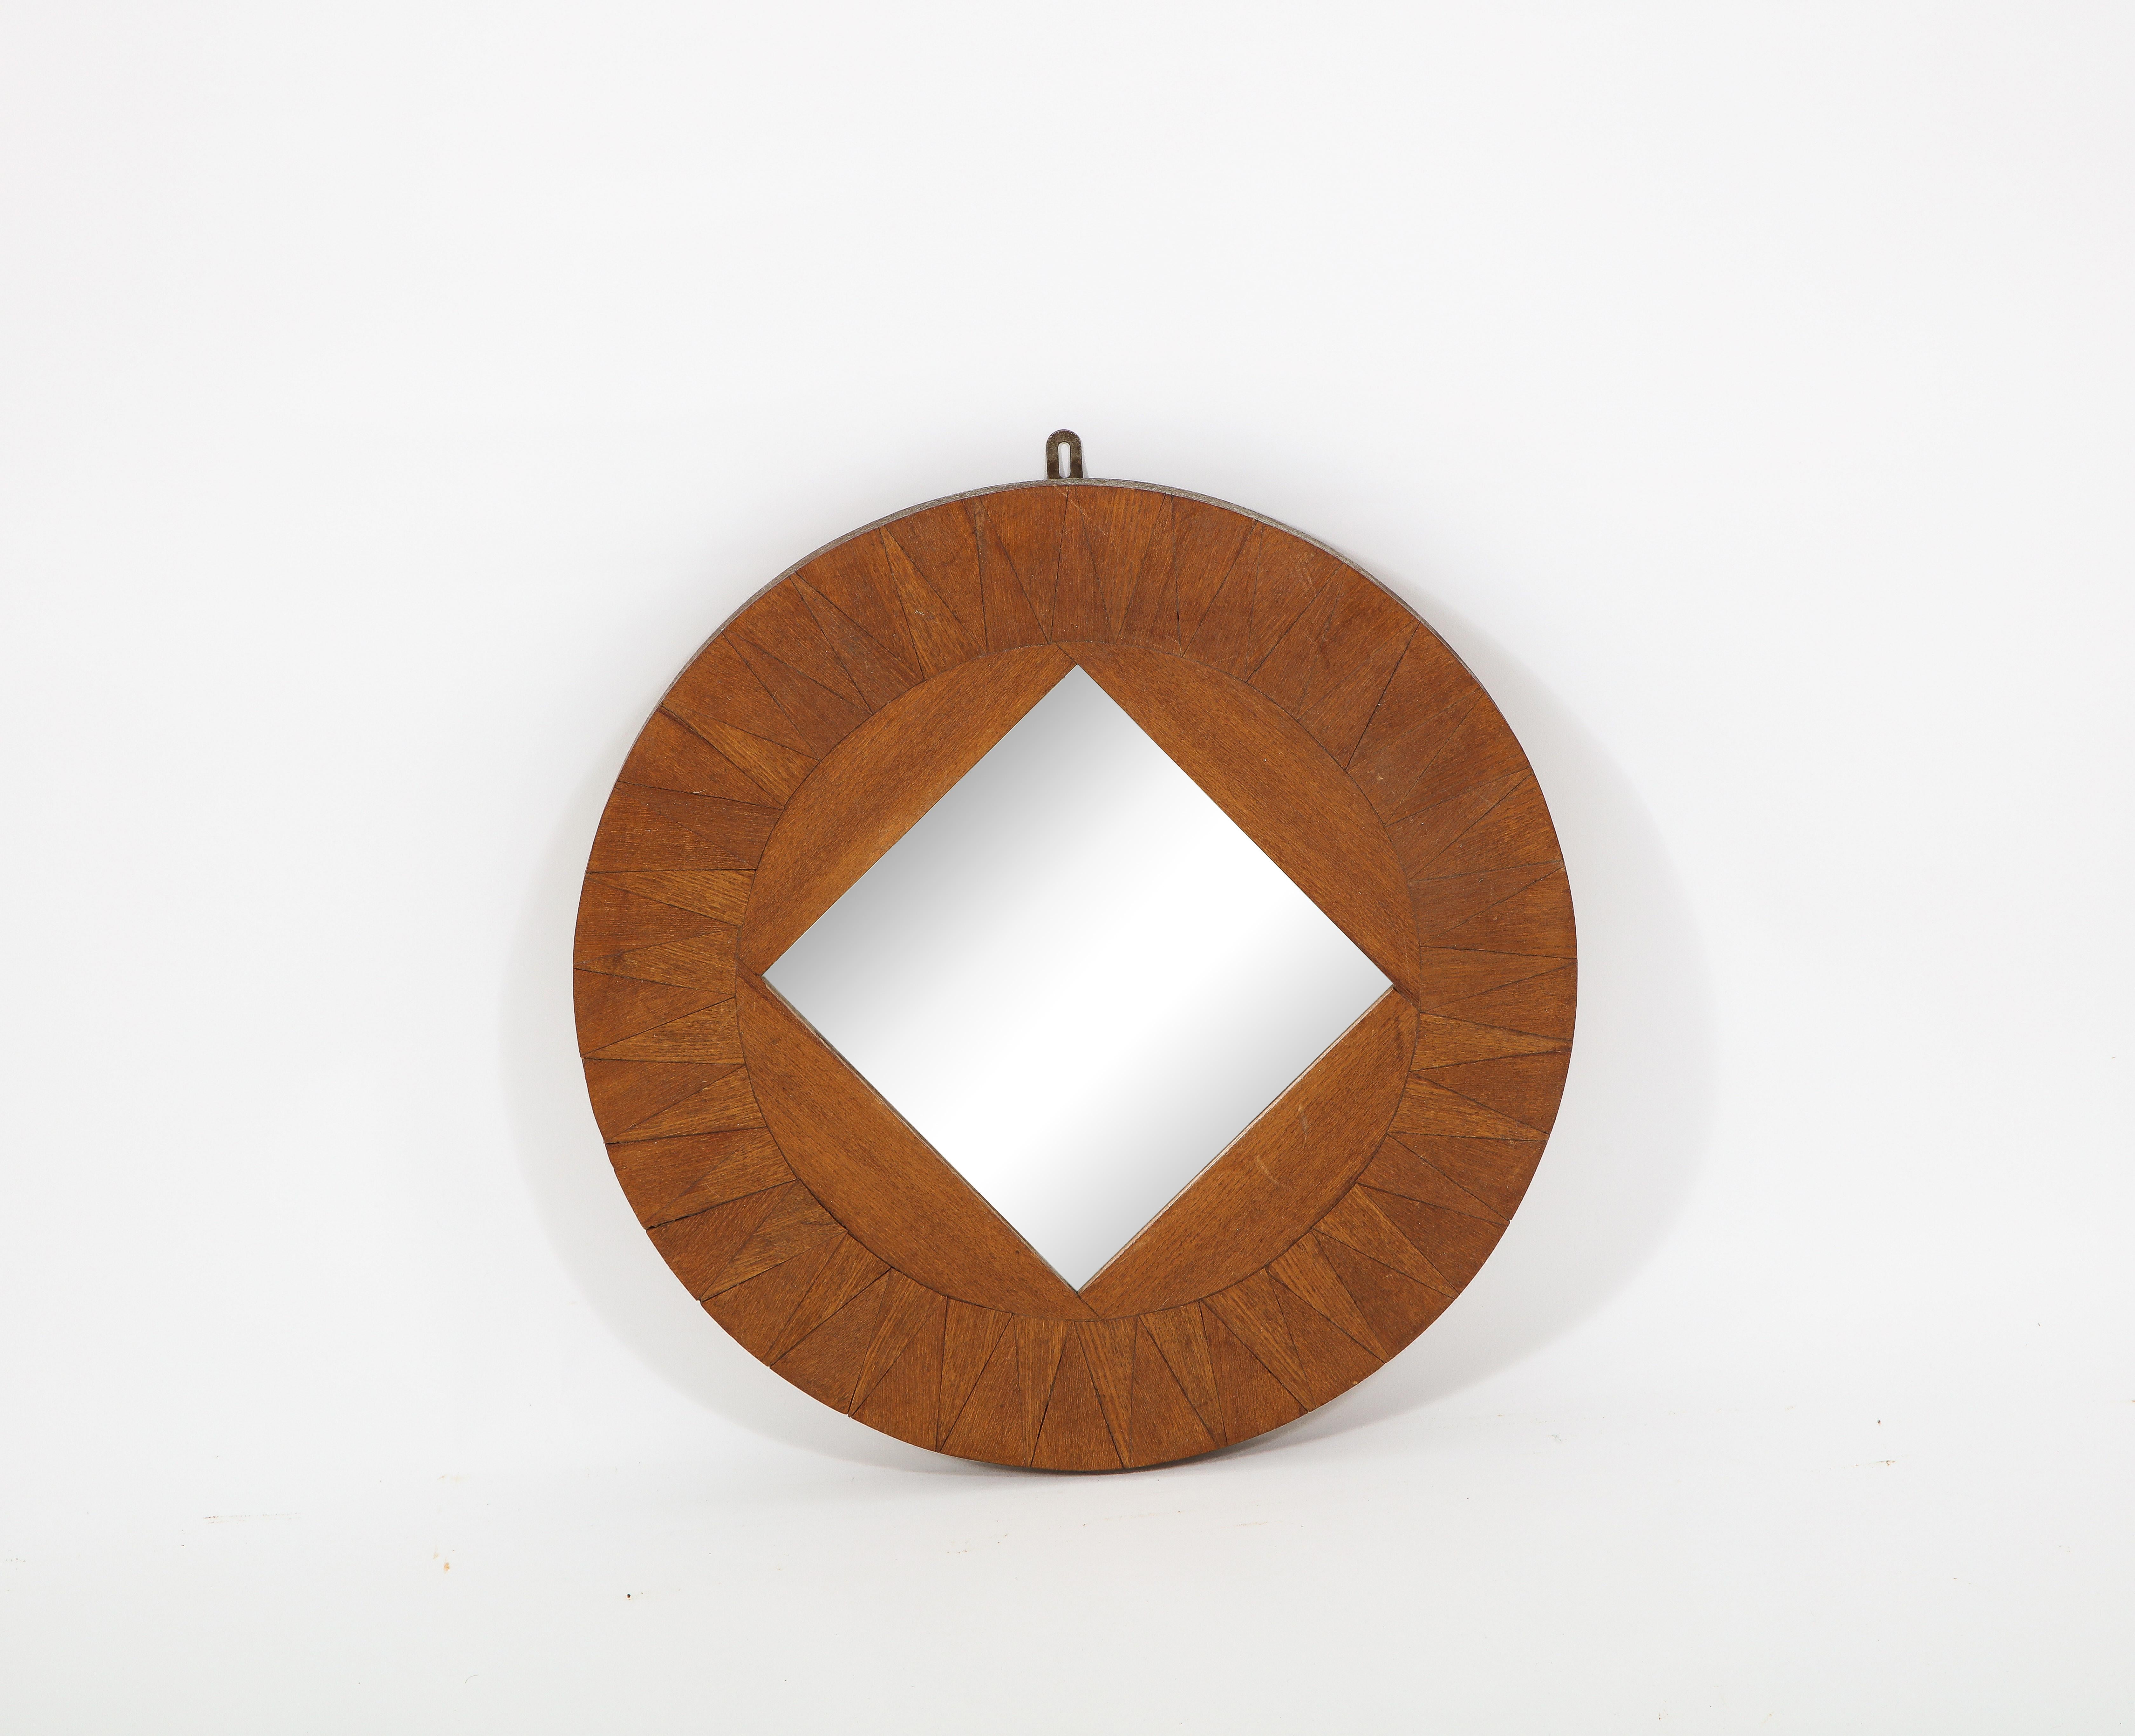 A round mirror in patterned veneer inlays with a square mirror insert.